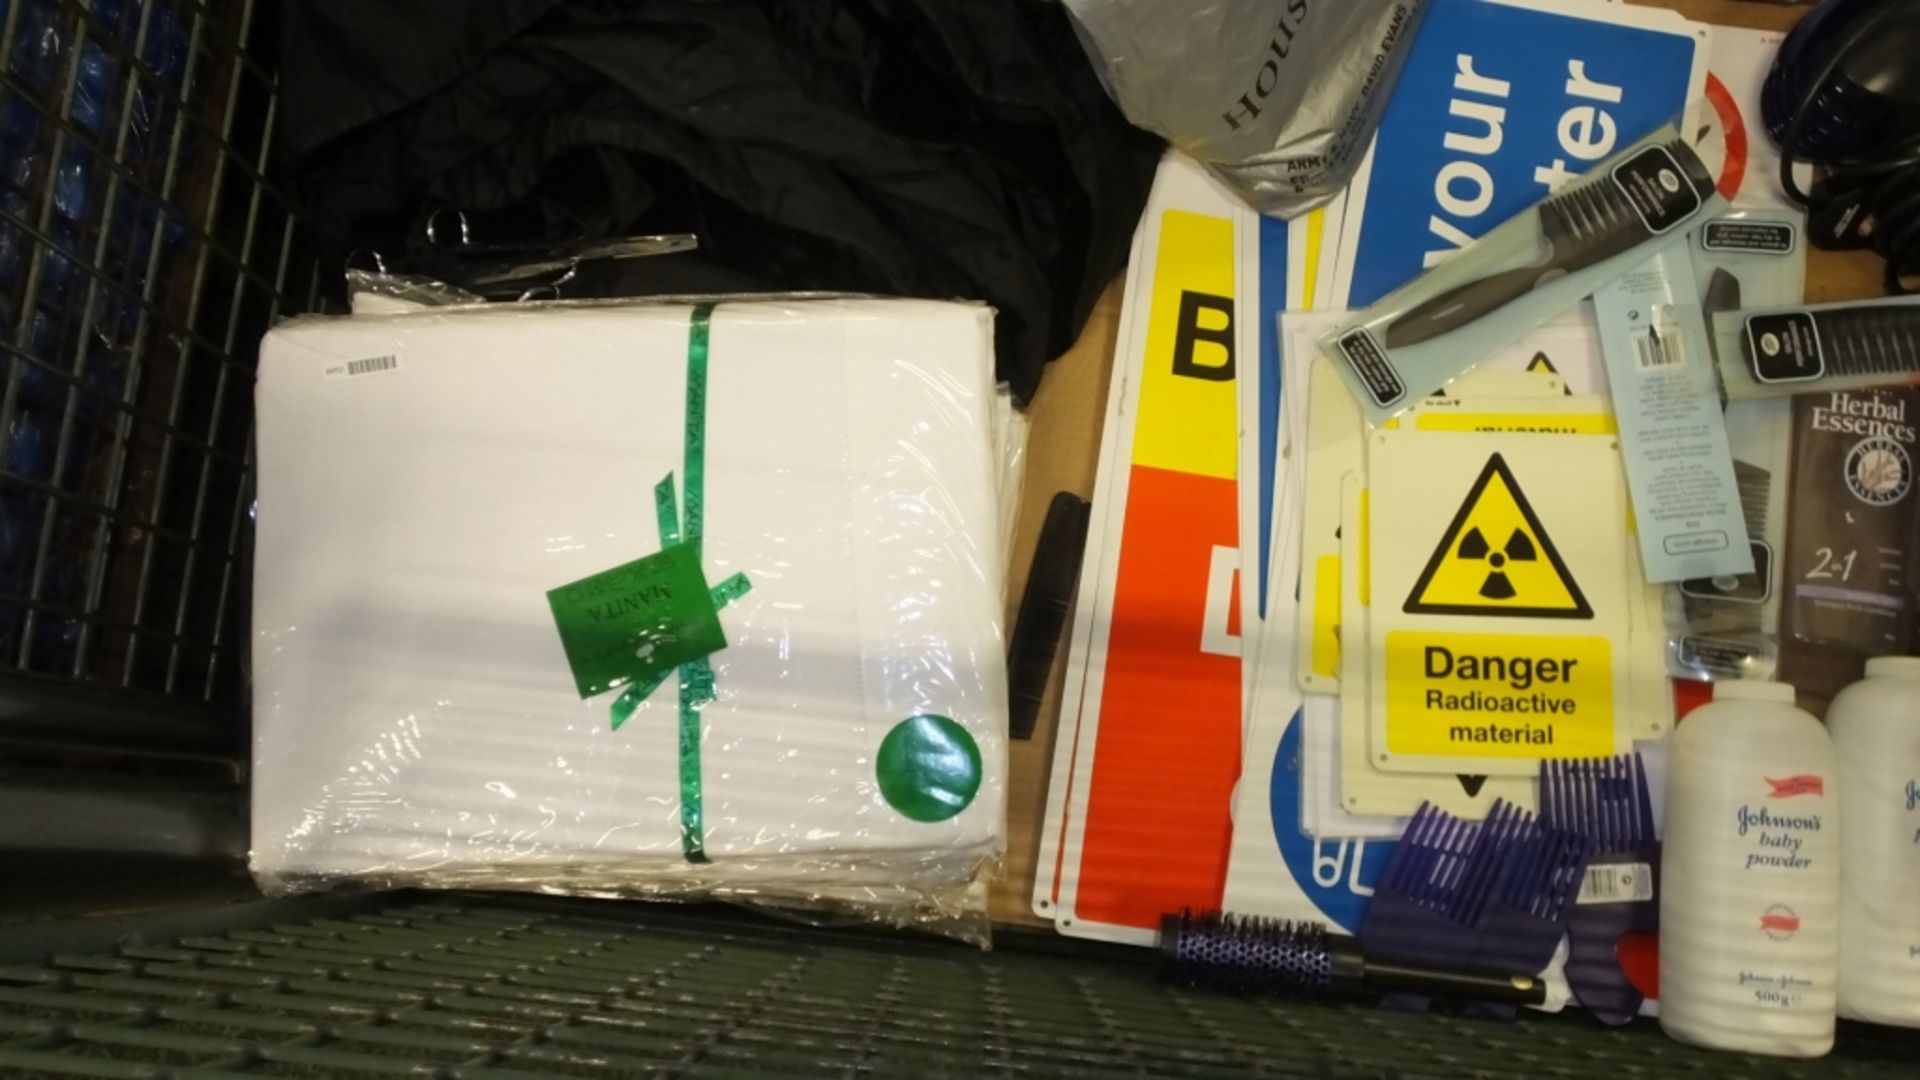 Blanket & Bed Spreads, Cotton Wool, Ntrile Gloves, Over boots Plastic, Signs Tape - Image 6 of 6